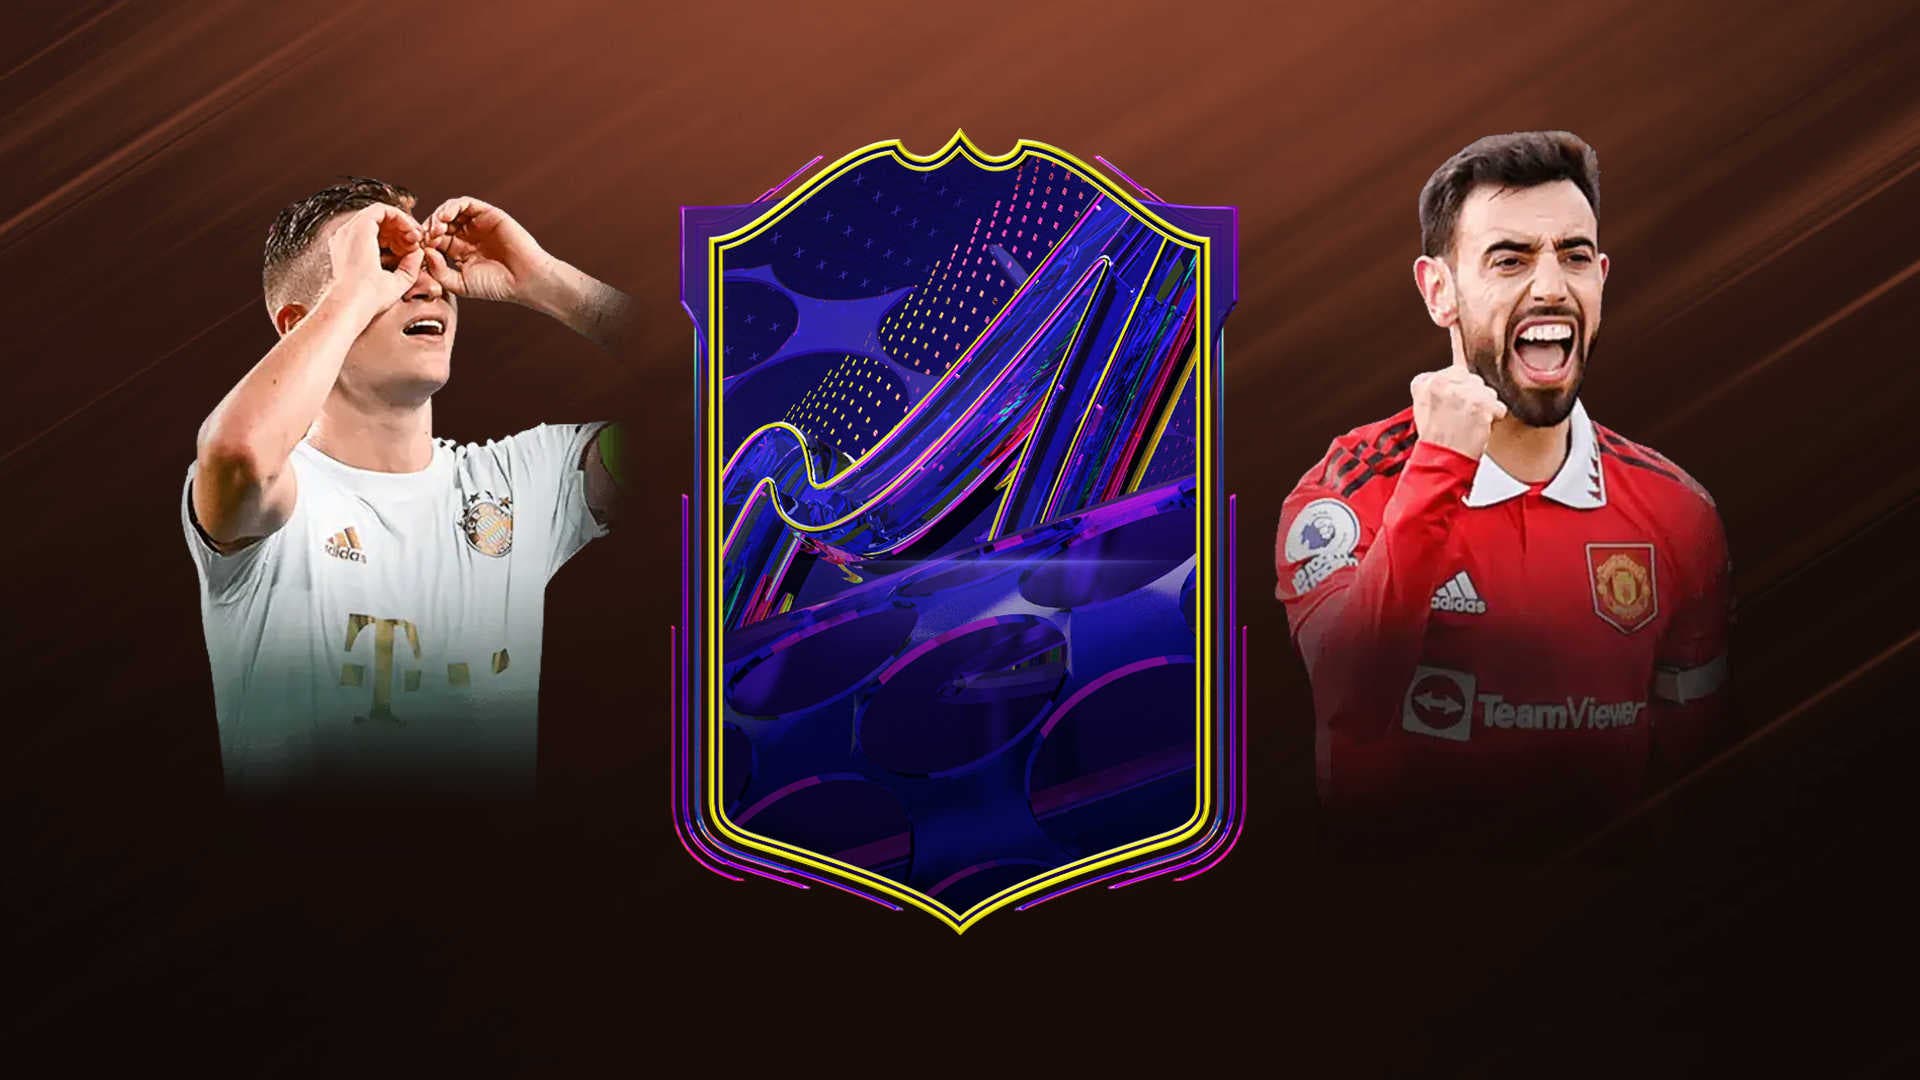 FIFA 23: new set of MOTM cards with OTW included and some high socks